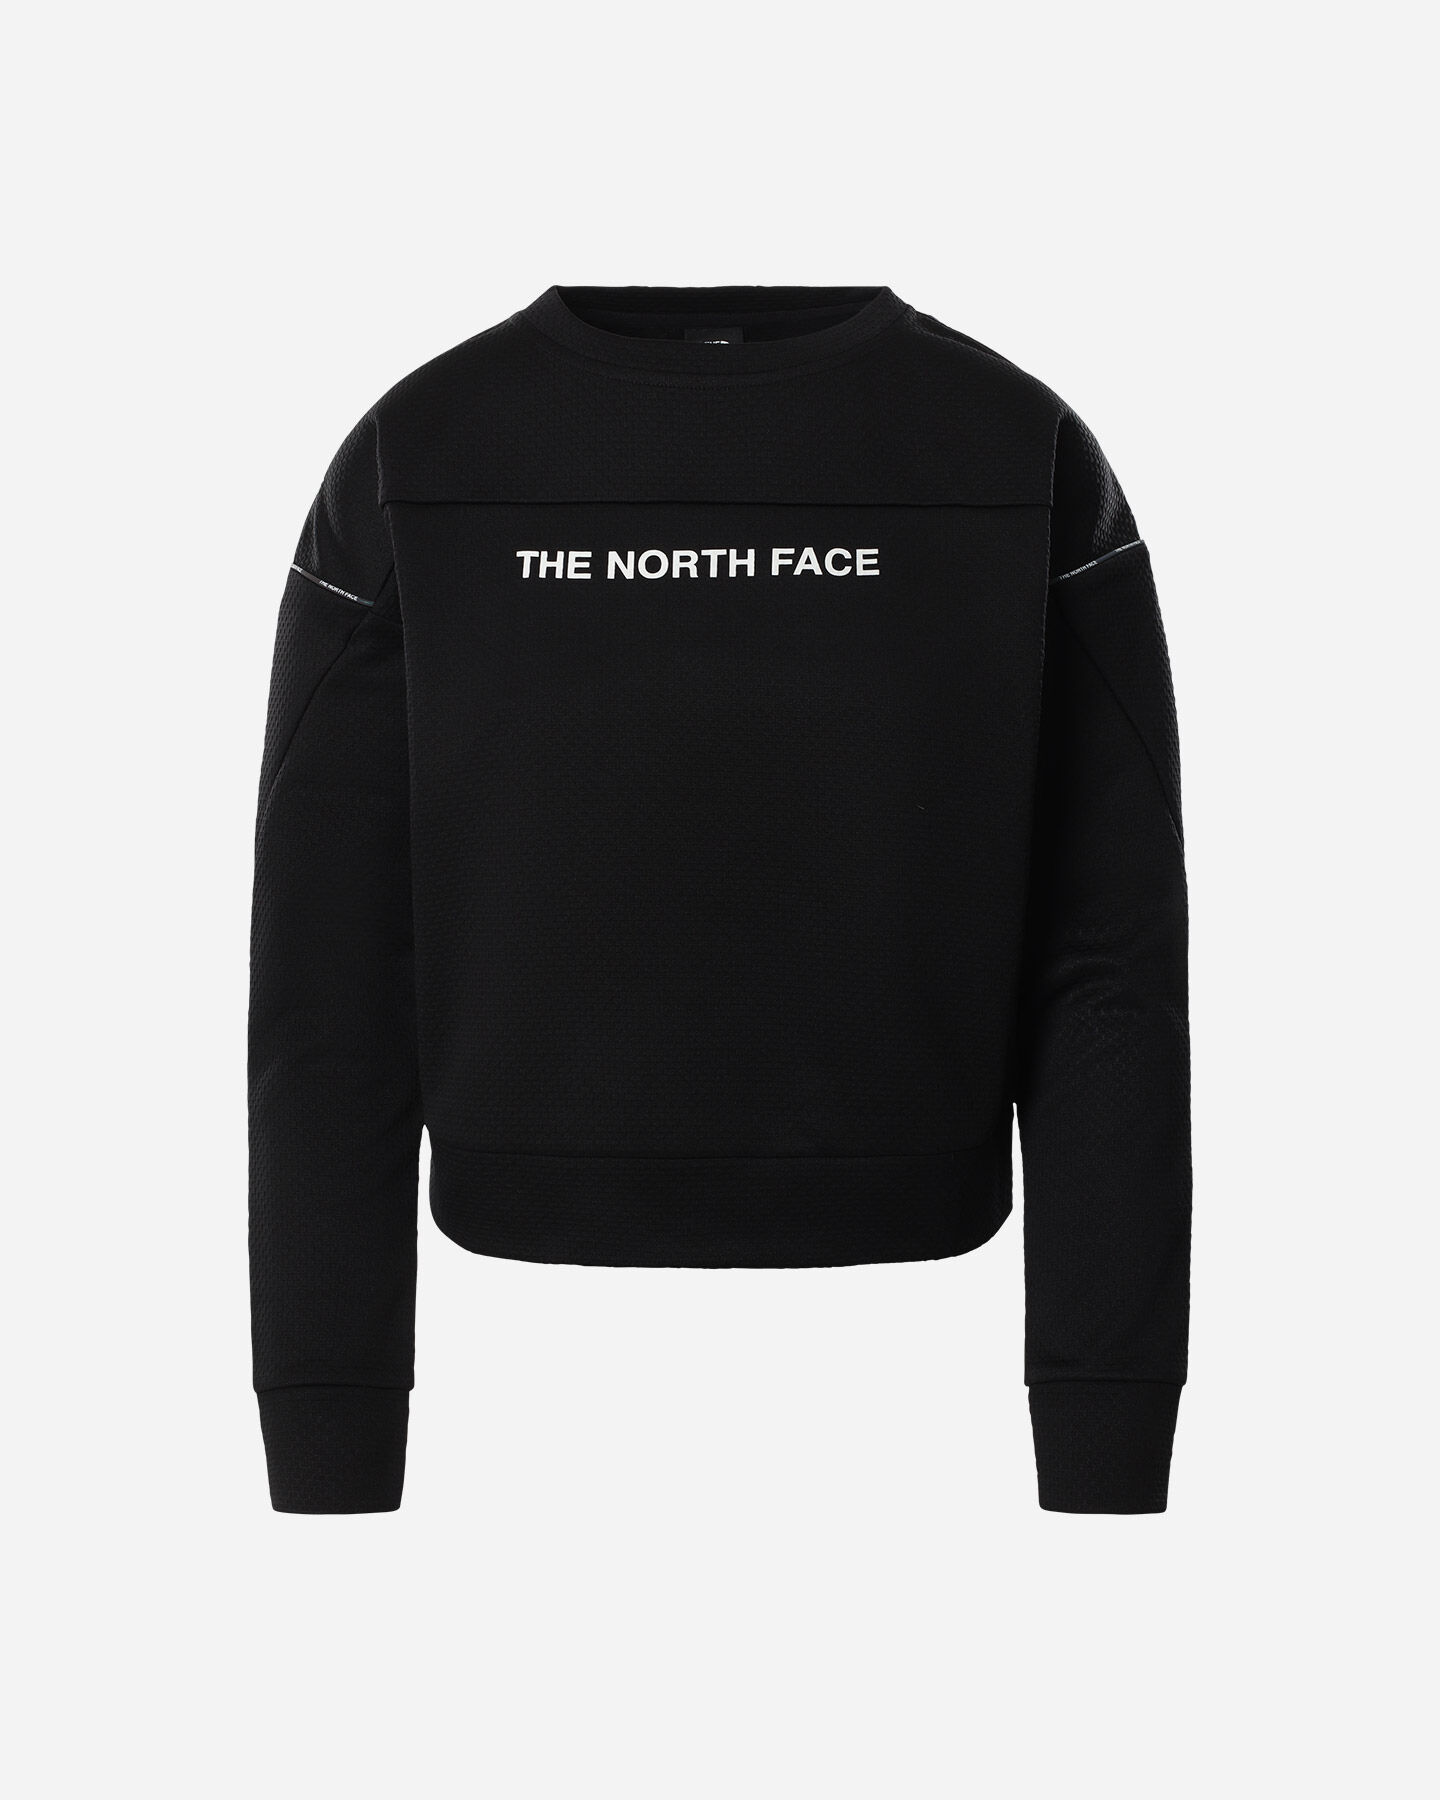  Felpa THE NORTH FACE LOGO EXTNDED W S5348074|JK3|XS scatto 0